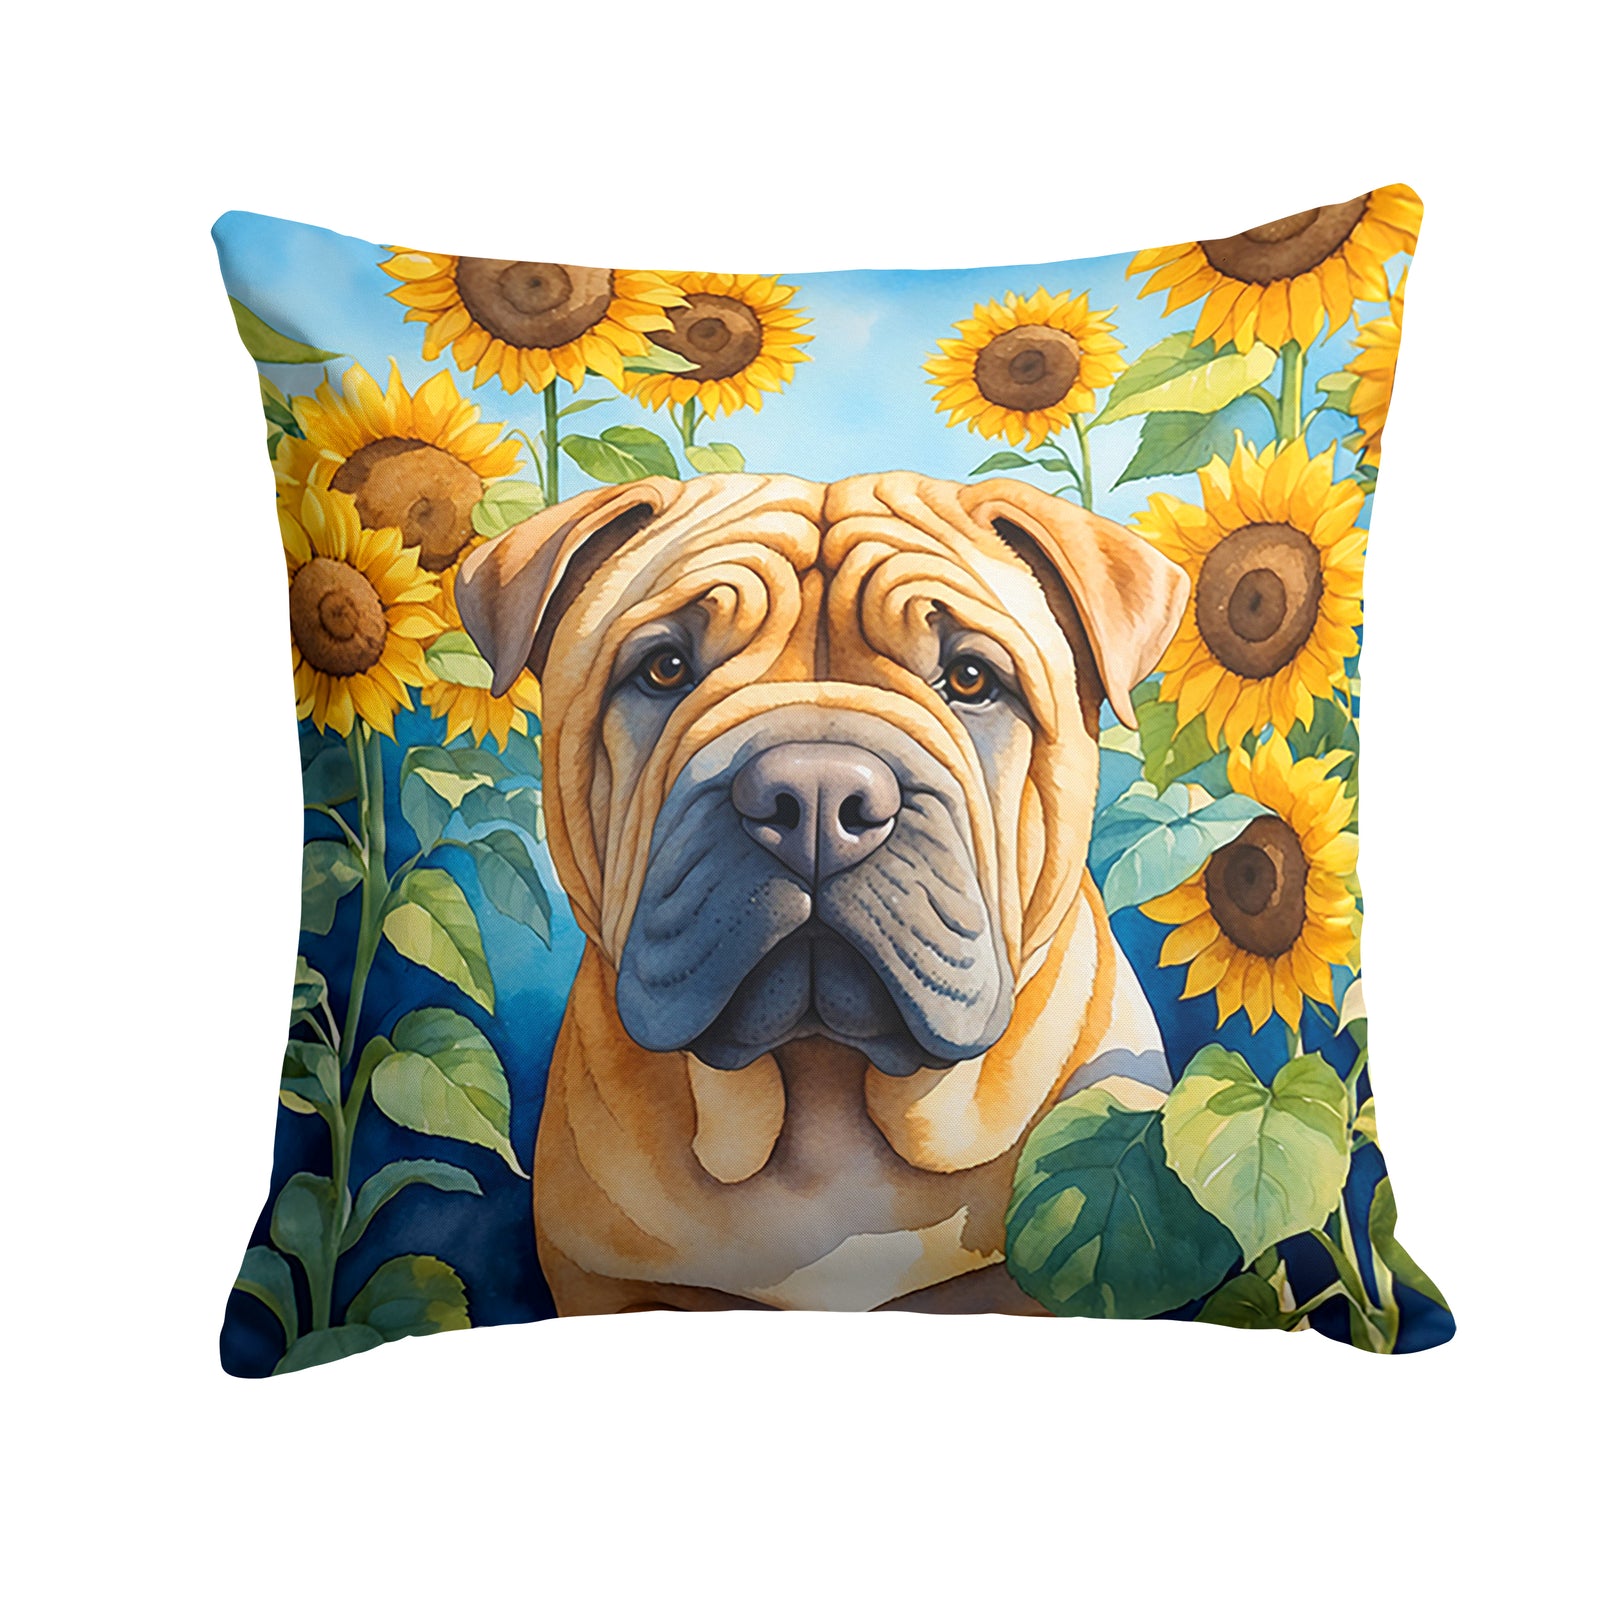 Buy this Shar Pei in Sunflowers Throw Pillow